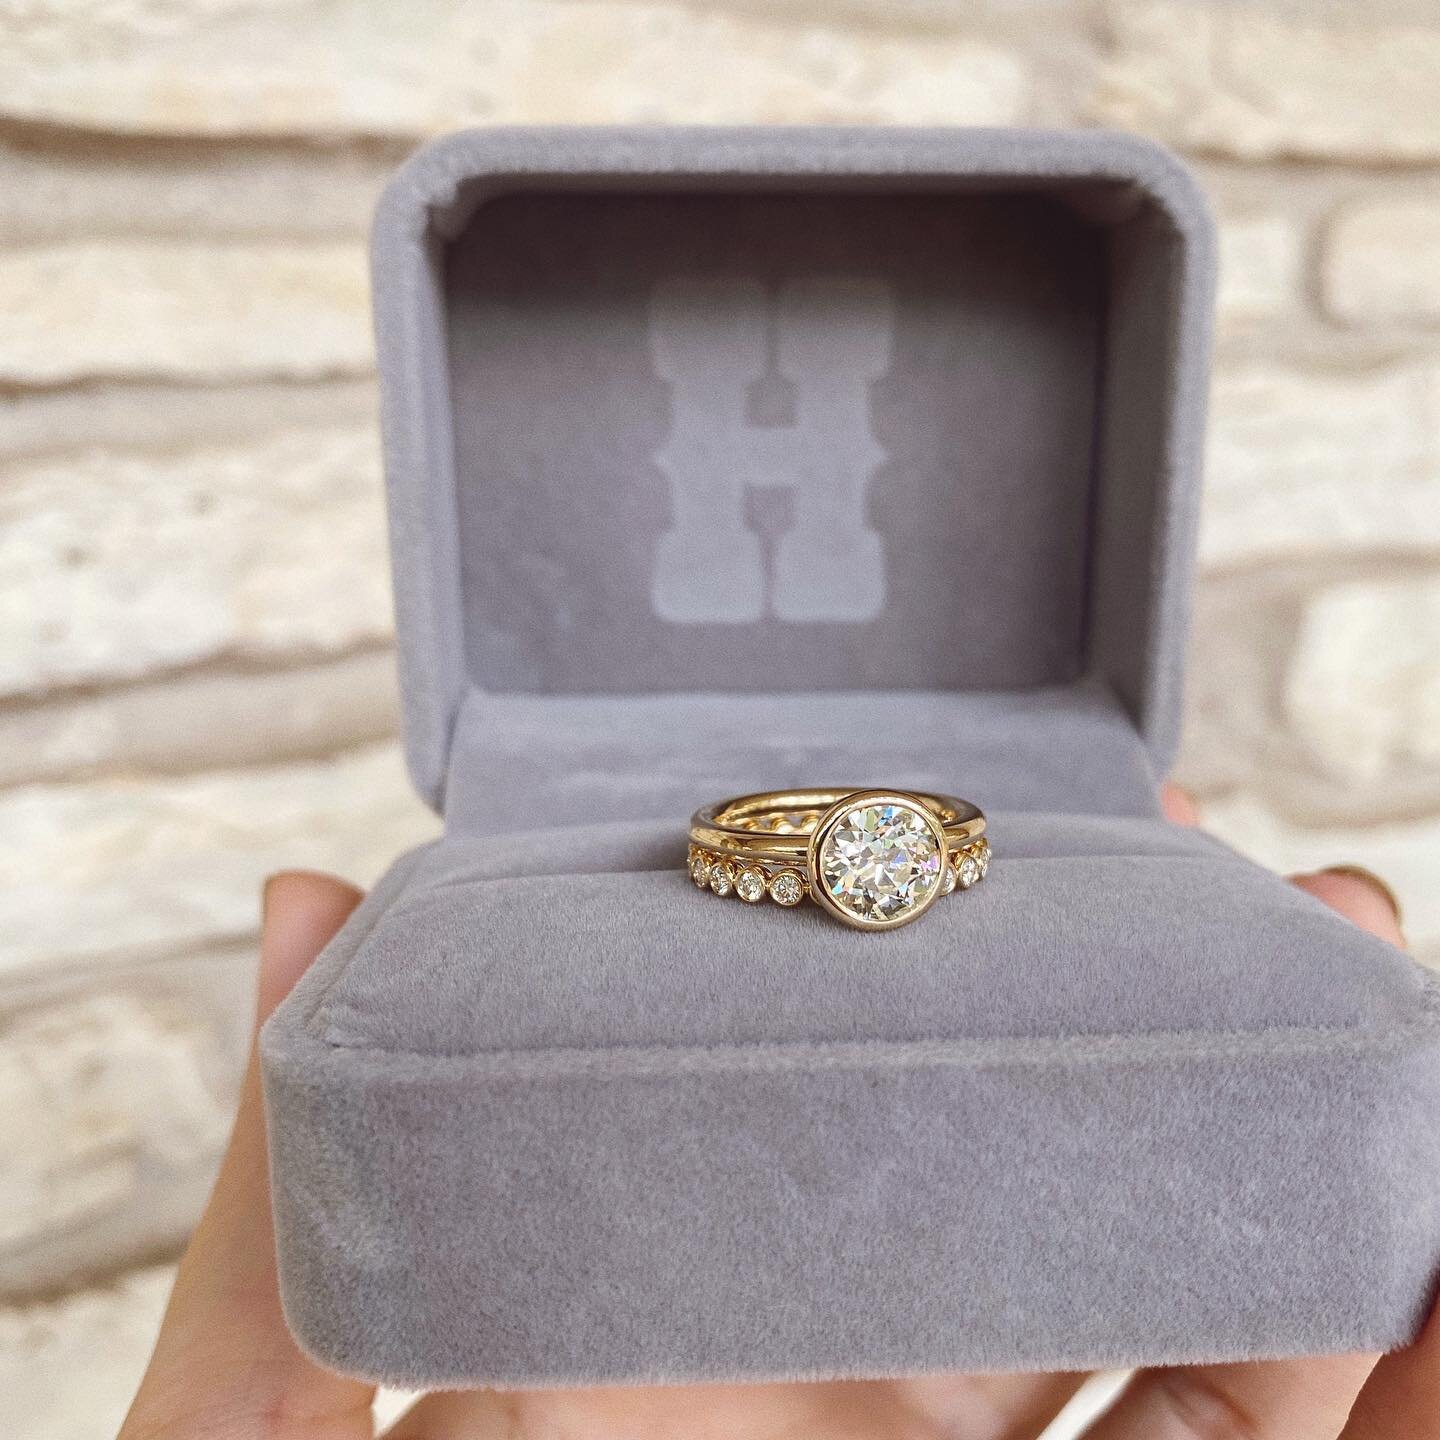 The seamless beauuuuuty of designing an engagement &amp; wedding band at the same time❣️ This antique Old European diamond is insanely gorgeous, I truly cannot believe all the colors you can see in the first photo of this post! Matching the engagemen